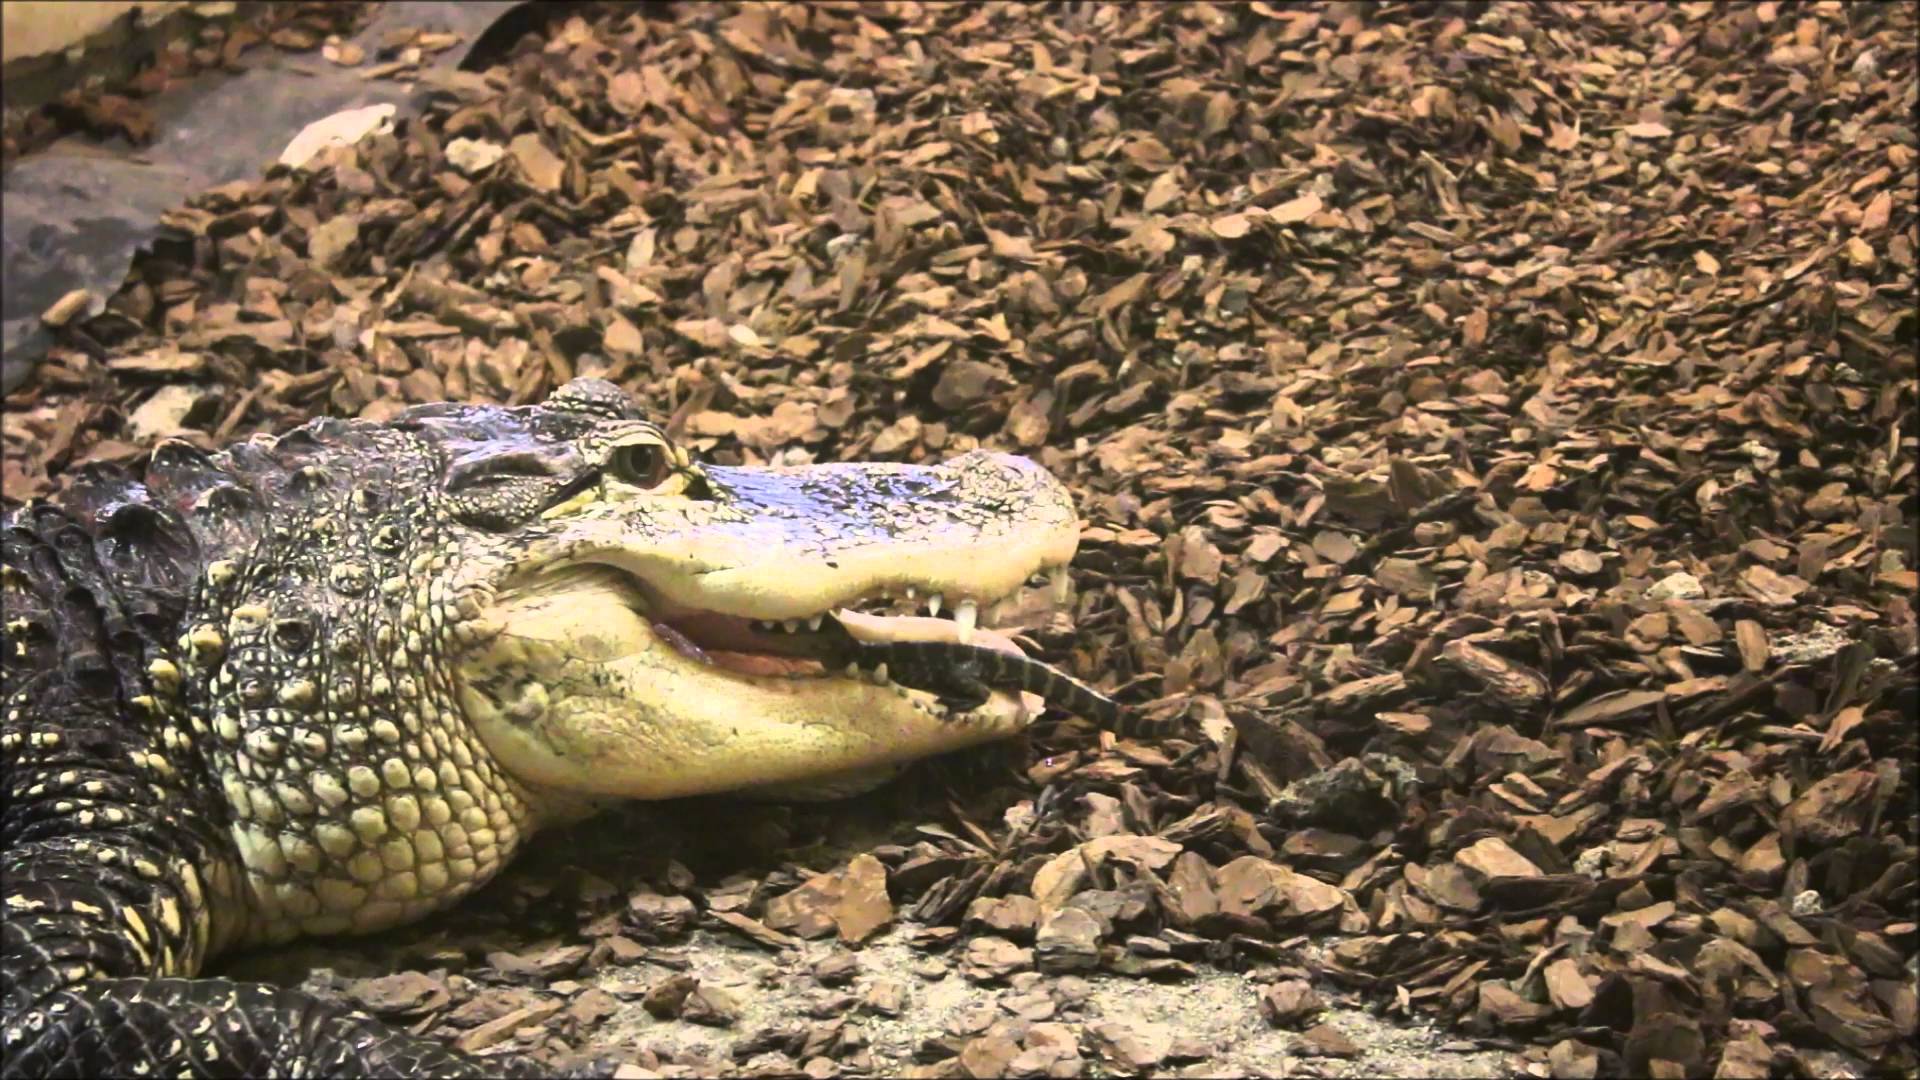 Alligator mother and baby - YouTube